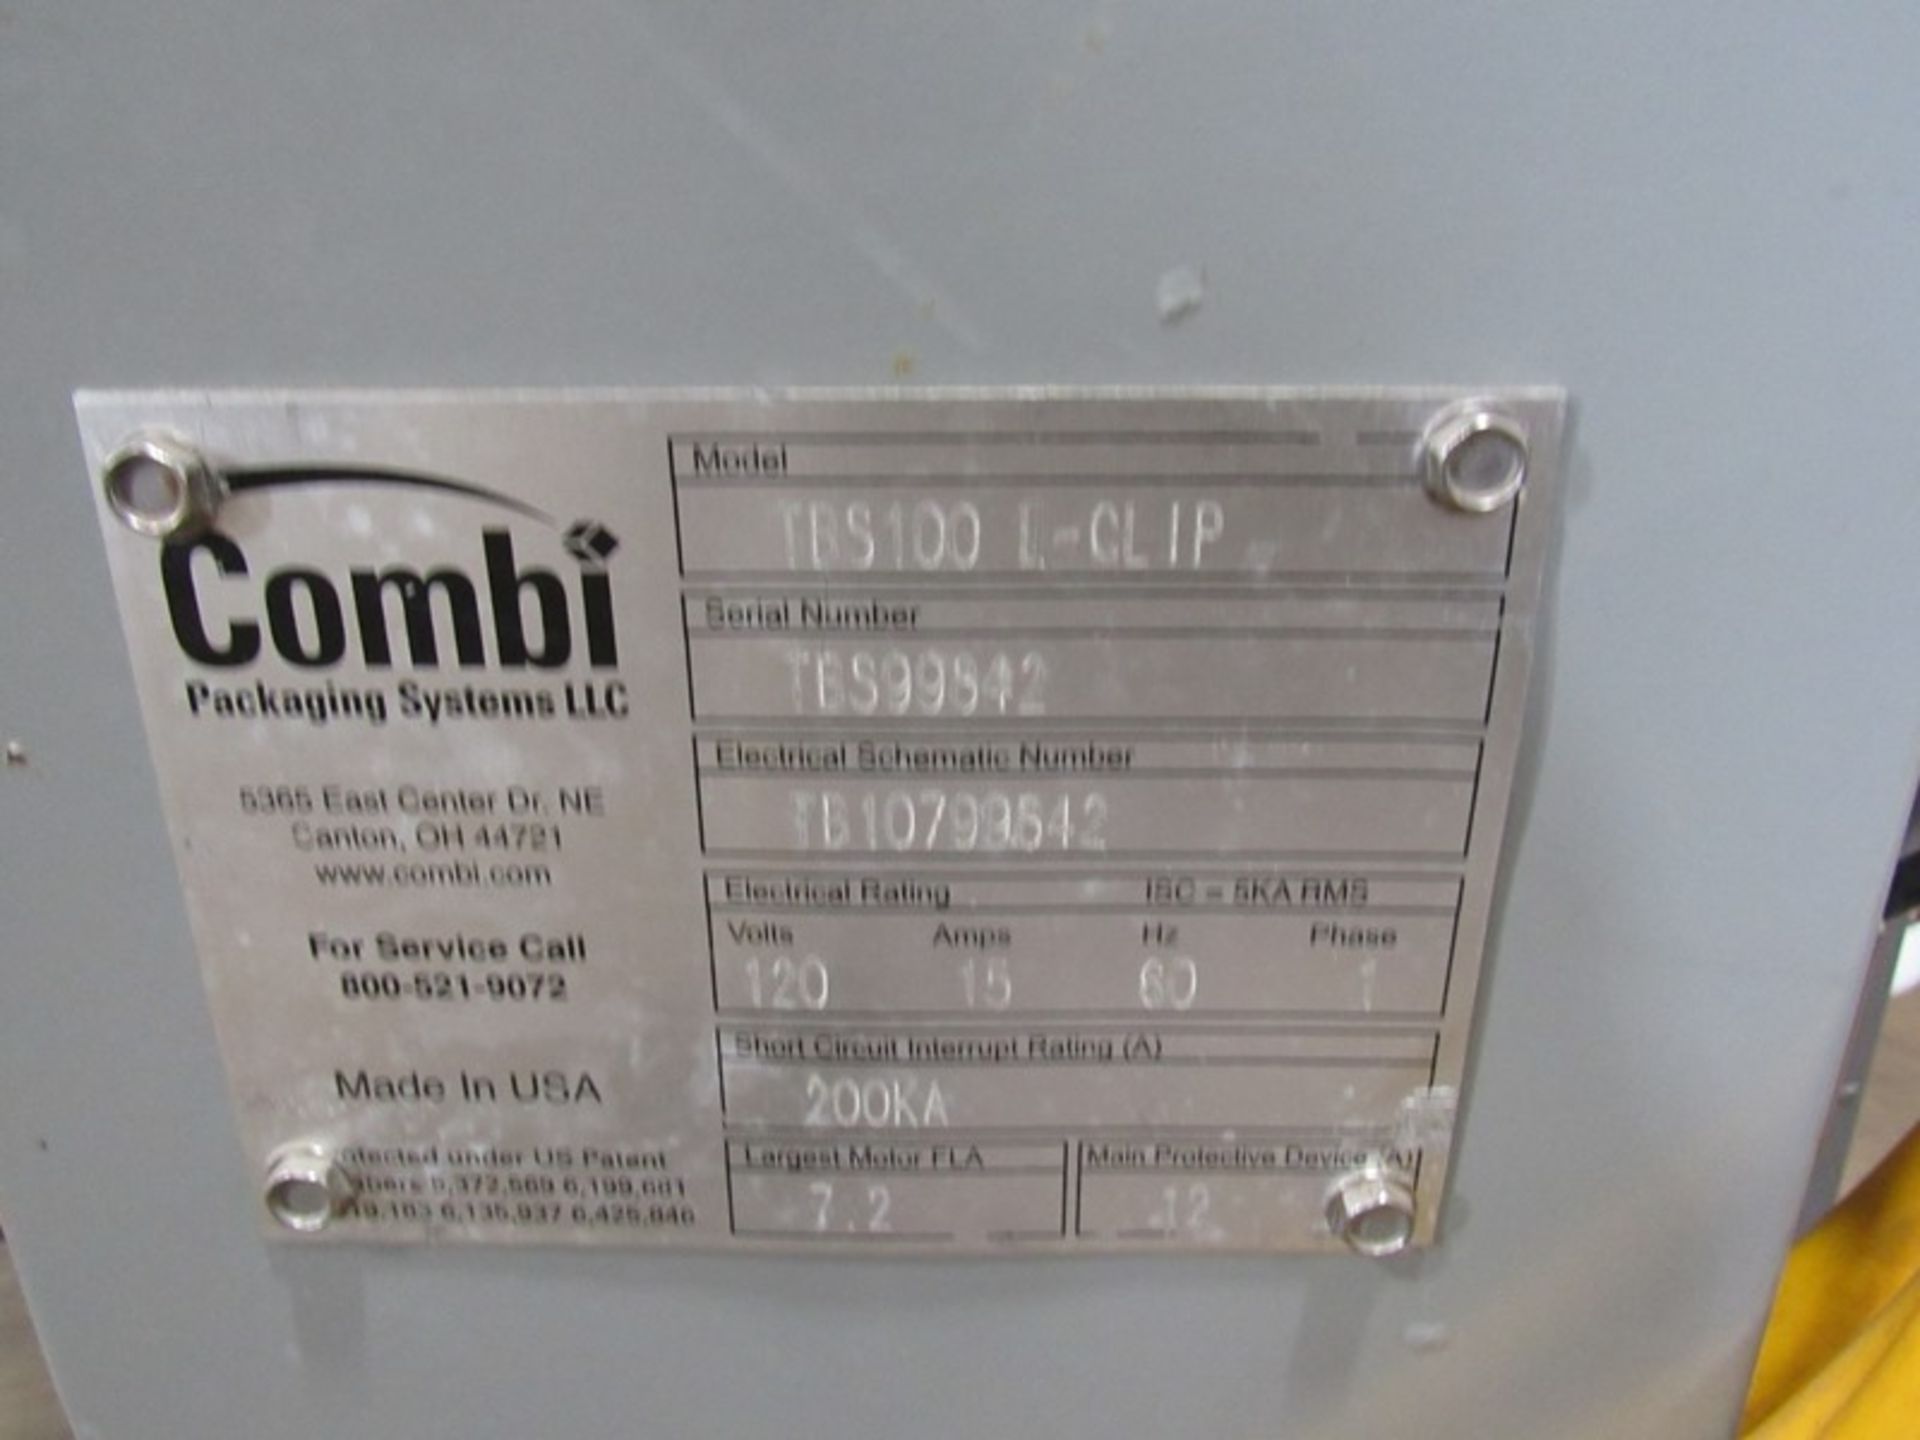 Combi Mdl. TBS100L-Clip Adjustable Carton Sealer, Ser. #TBS99842, top tape head only (Located in - Image 4 of 4